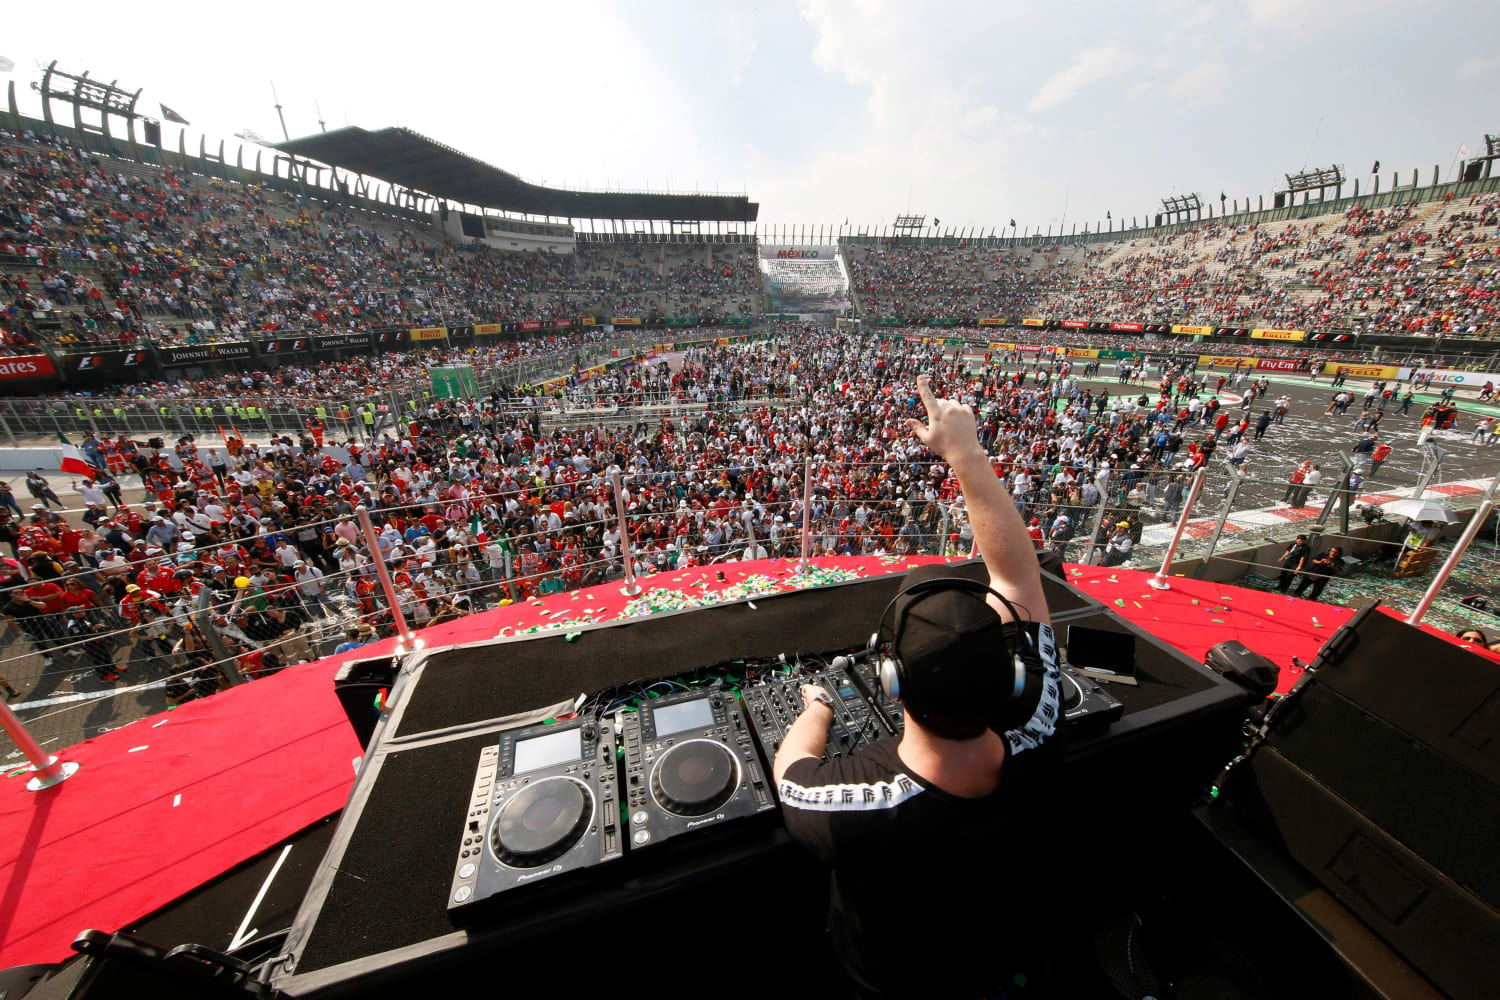 DJ Hardwell plays at the Mexican Grand Prix in 2017